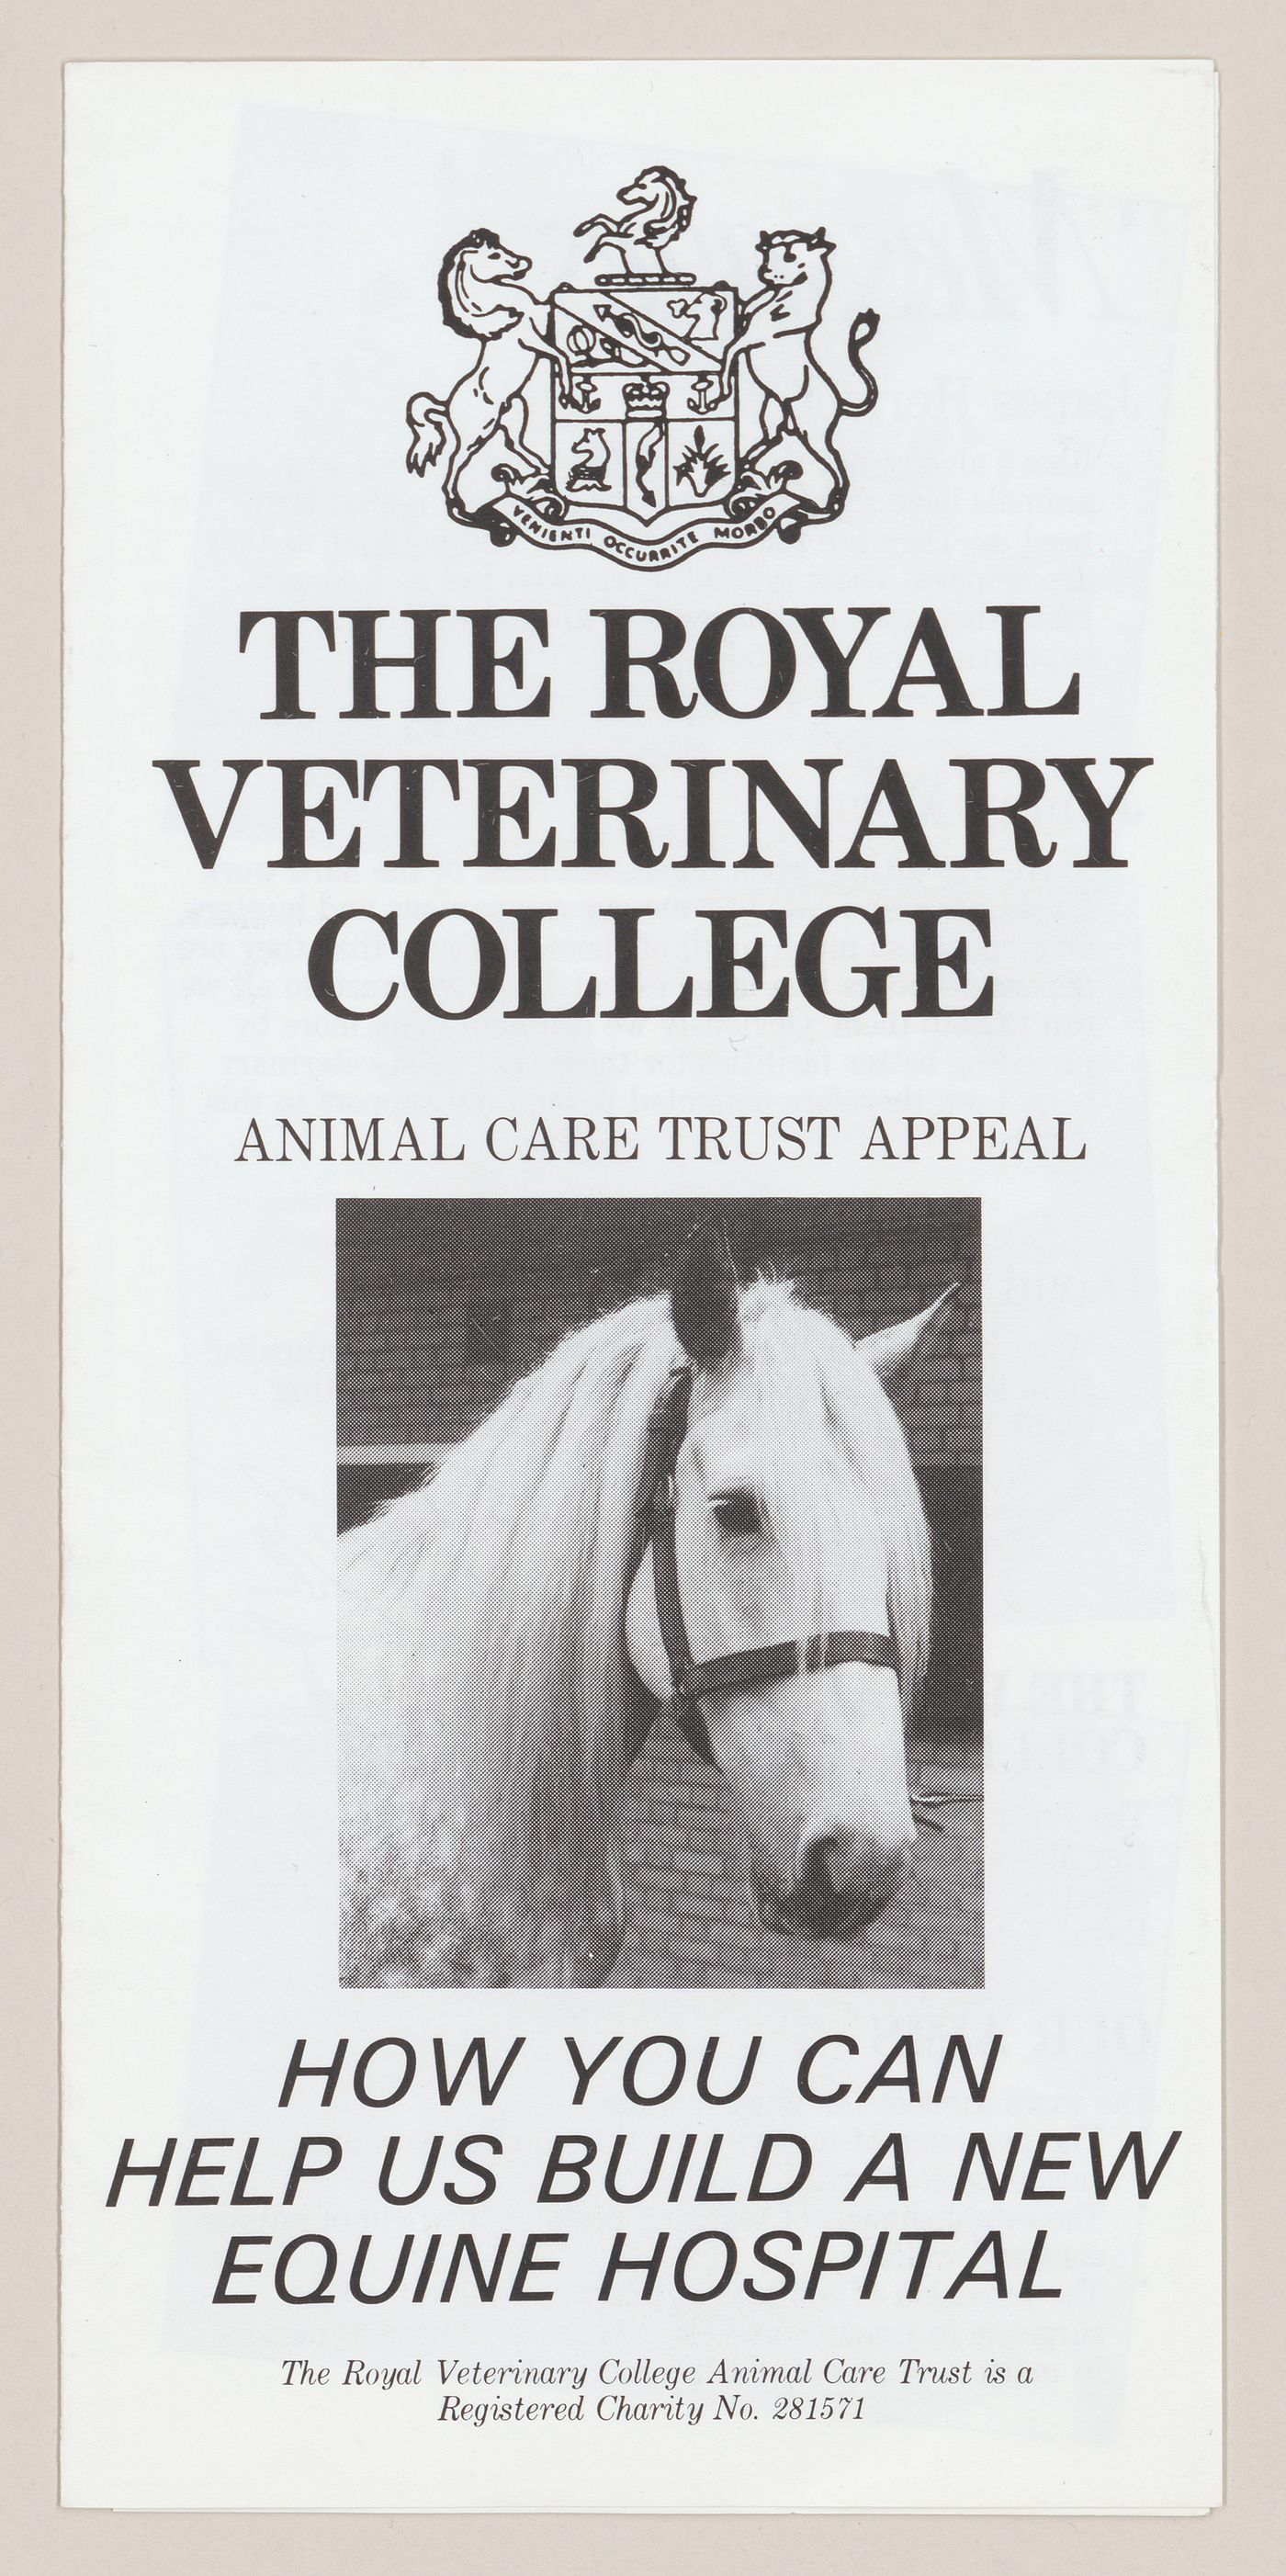 Fundraising brochure "How you can help us build a new equine hospital" from The Royal veterinary college